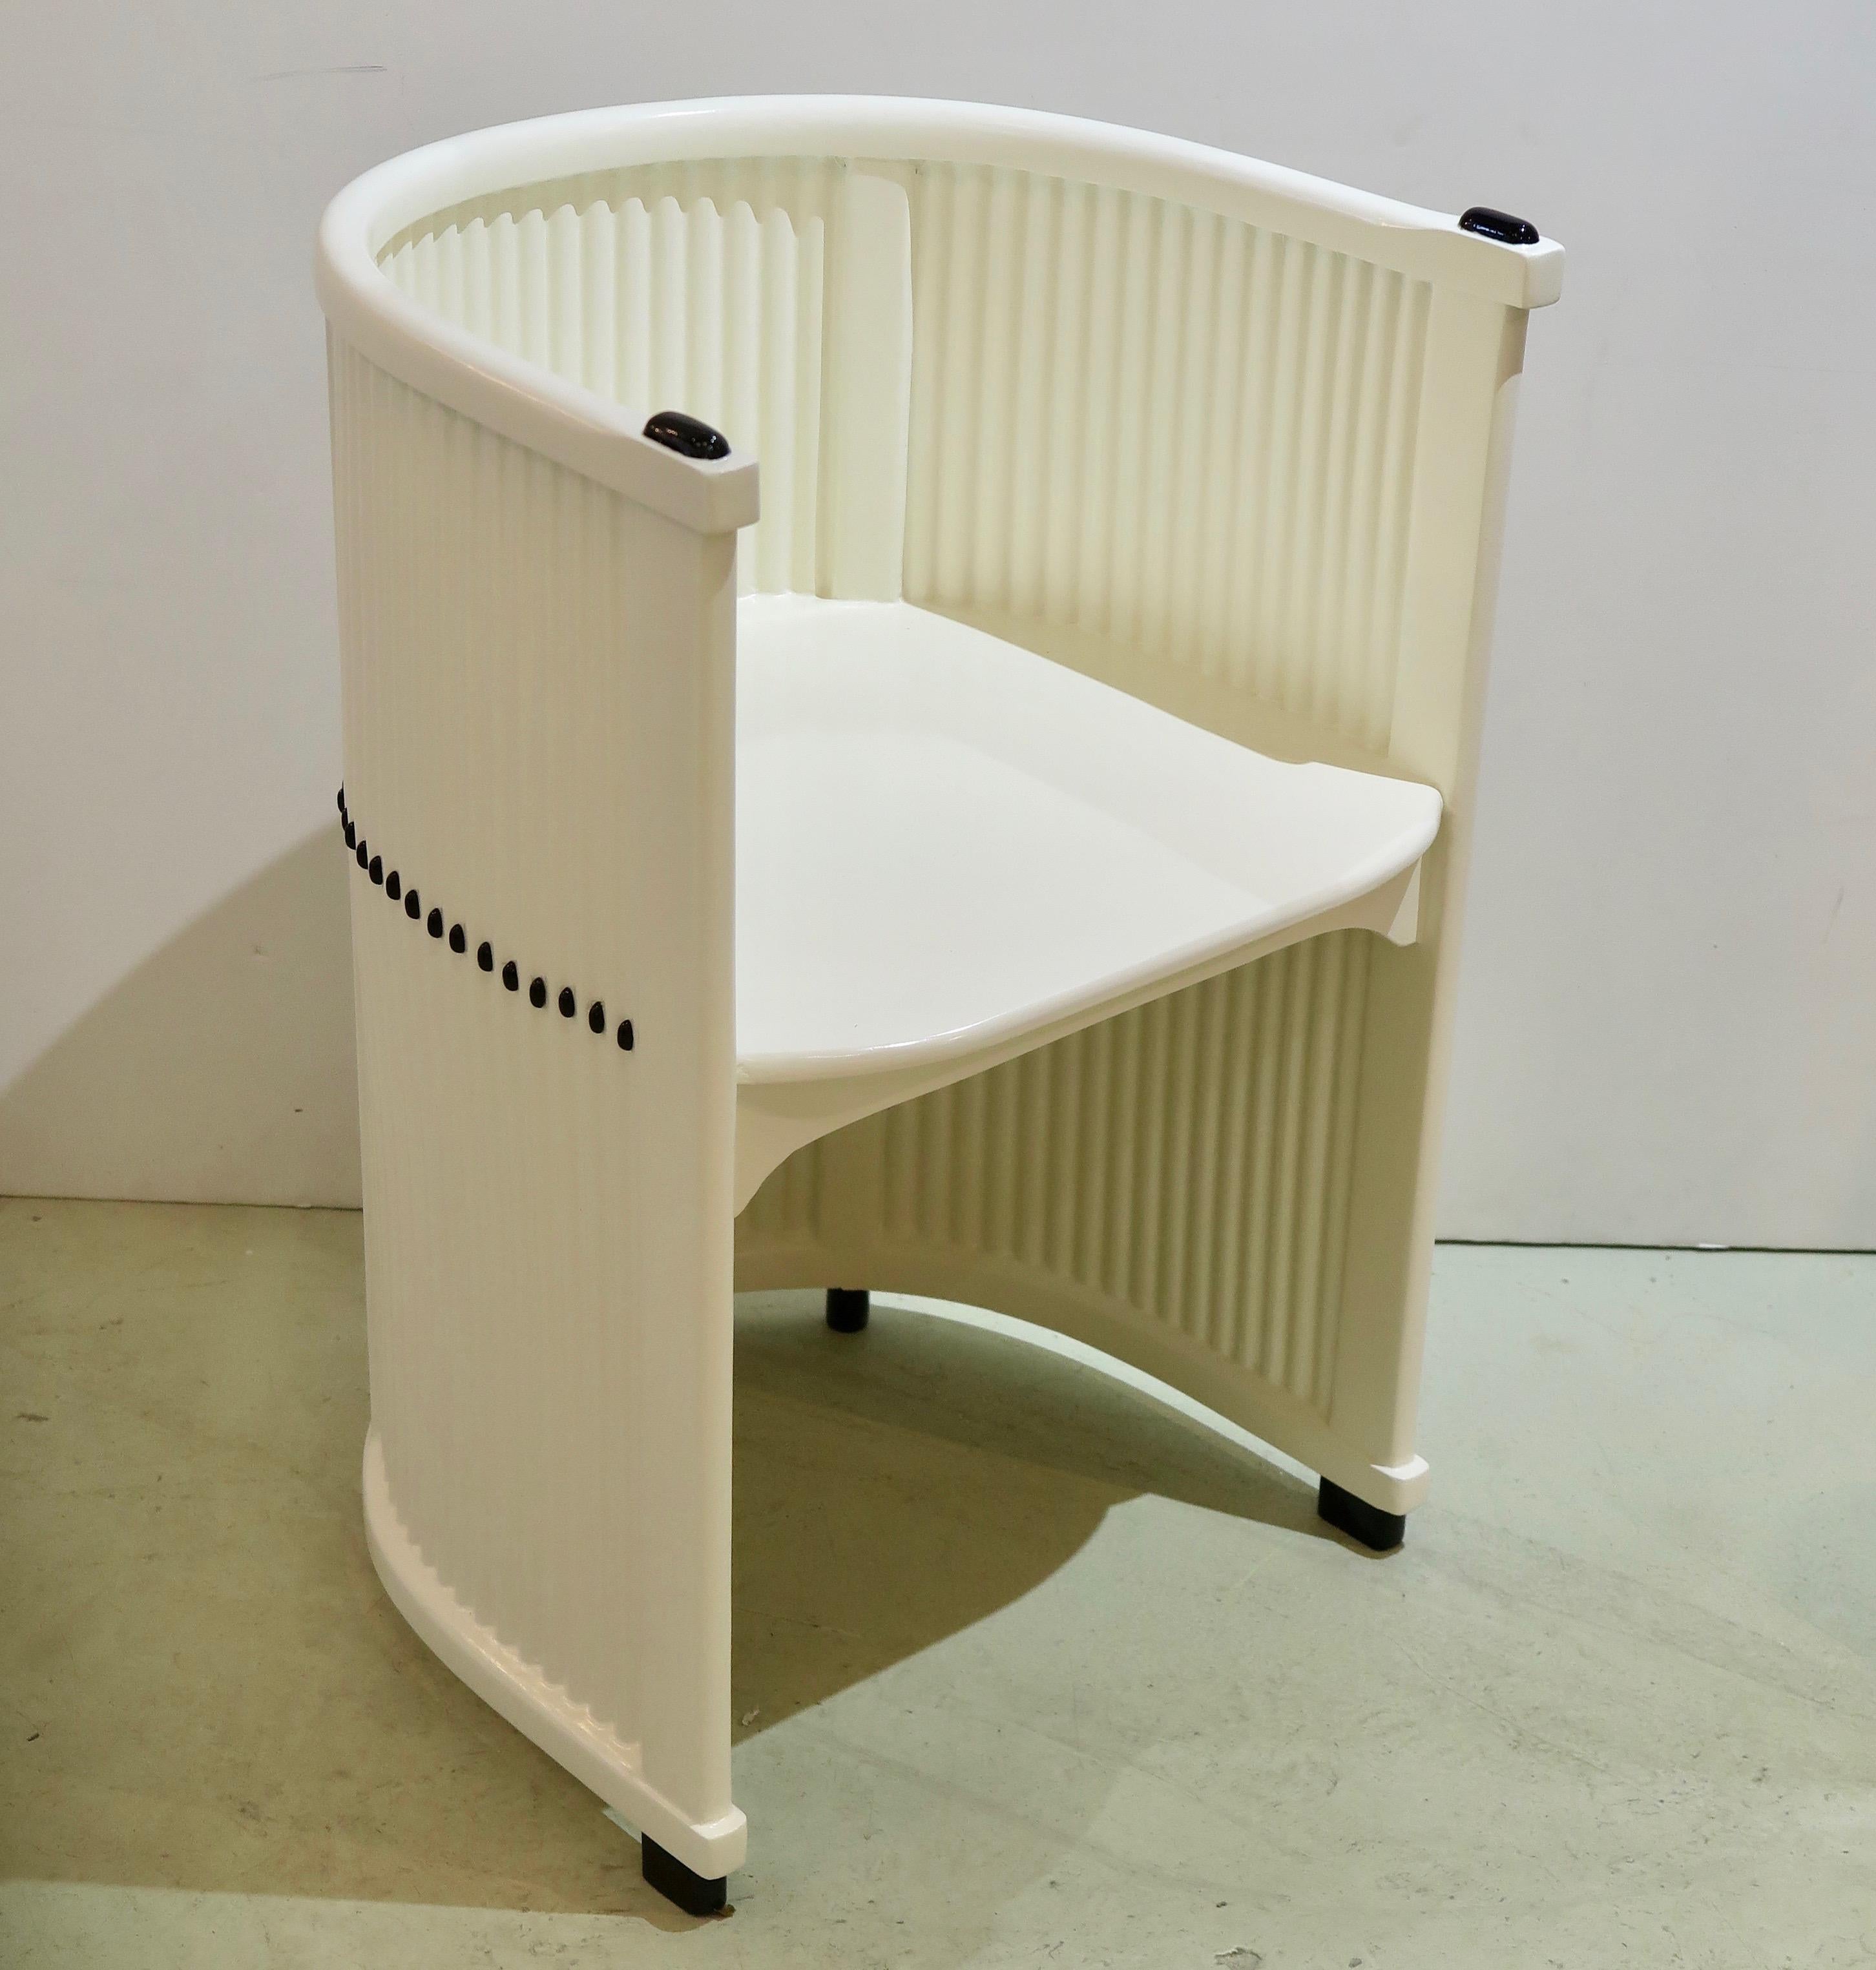 Vienna Secession pair of armchairs in white lacquered beech wood and corrugated cardboard with black decorative details designed by Hans Günther Reinstein, manufactured by Österreichische Möbelgesellschaft, circa 1911.
Restored and in perfect